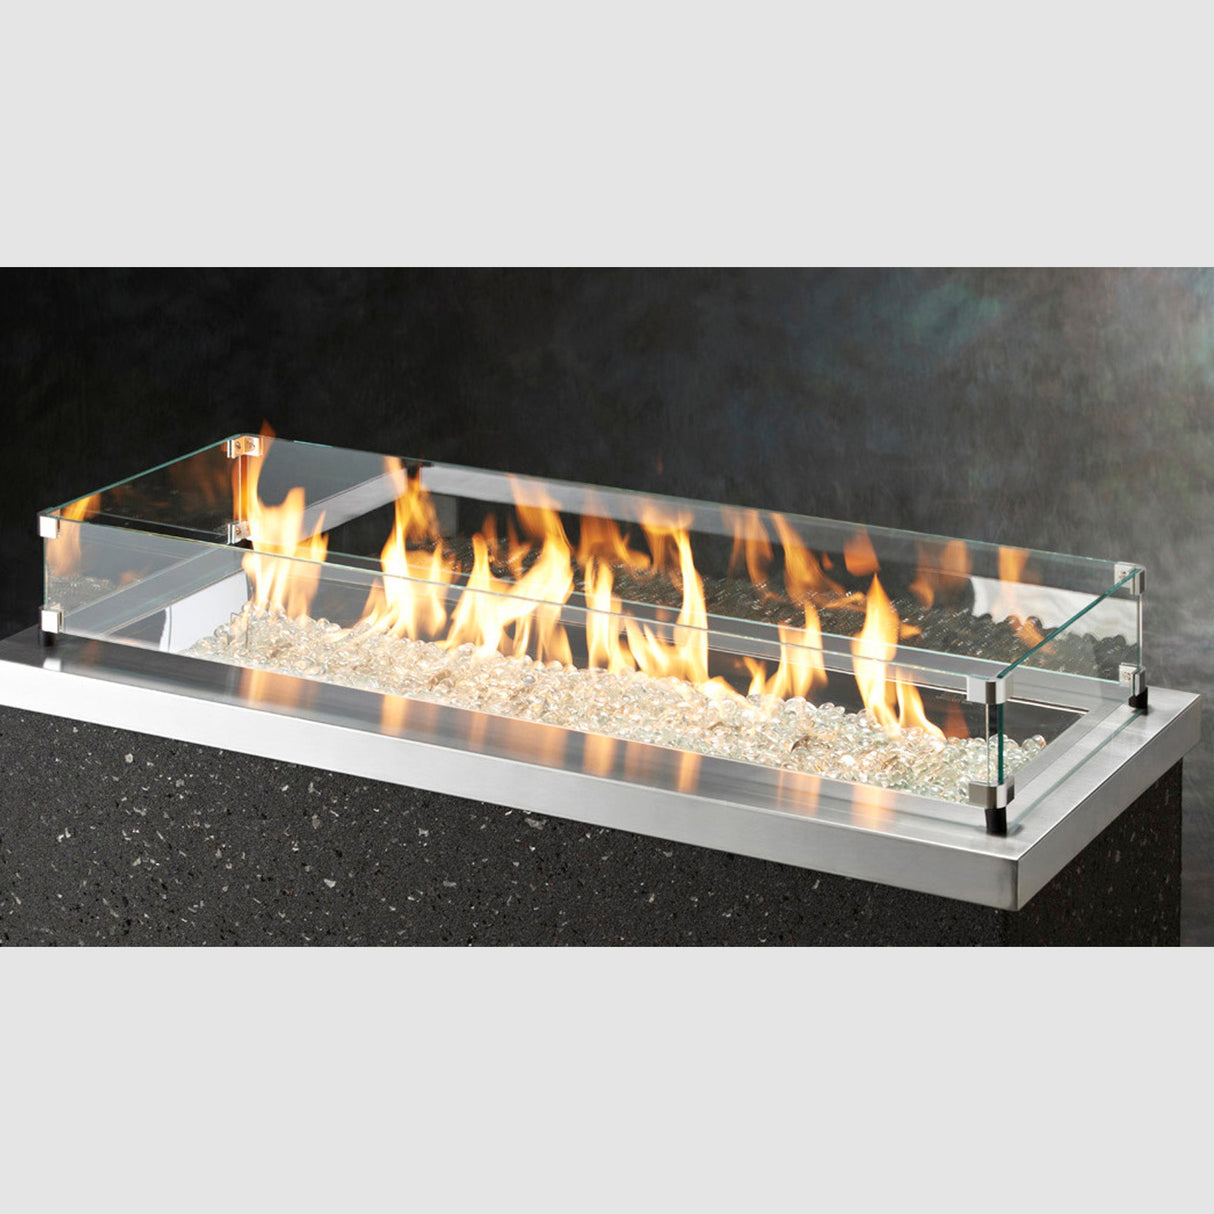 The Linear Glass Wind Guard protecting the flame of a fire pit table in a studio